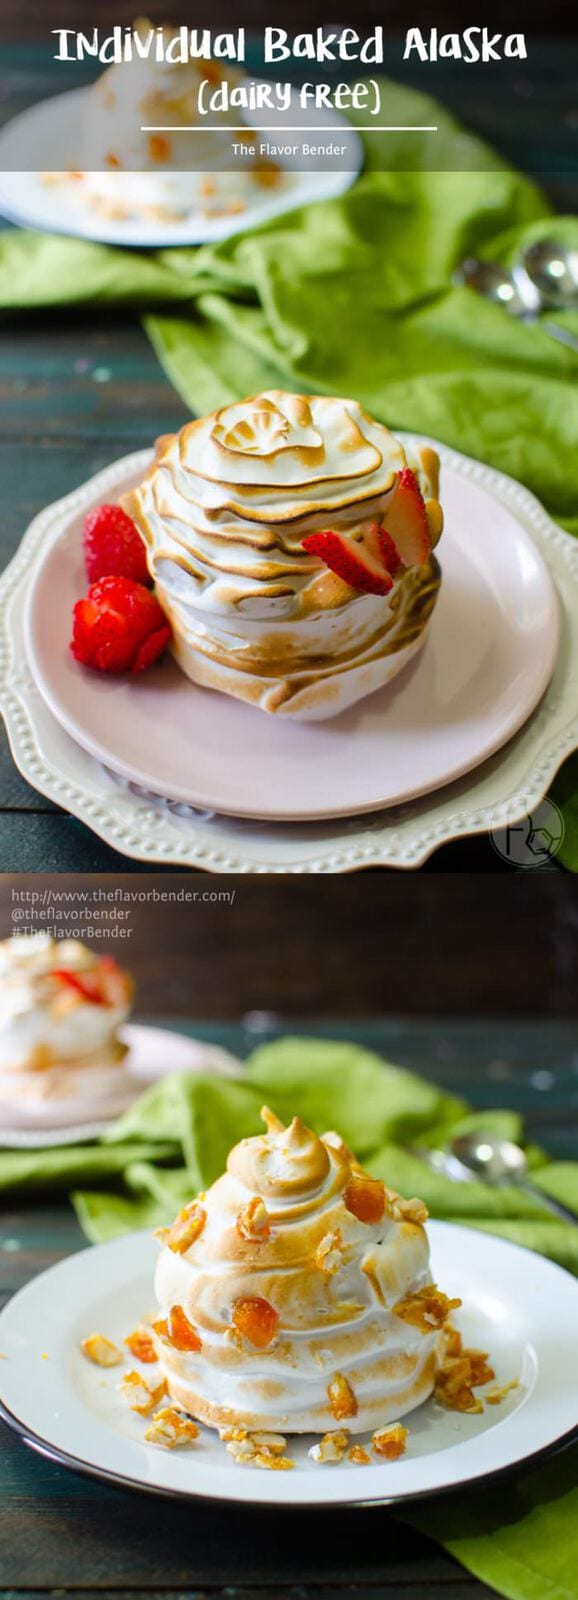 Dairy Free Individual Baked Alaska - with a soft, moist chocolate cake base, So Delicious Dairy Free® Frozen Treats in the middle, and then covered with a silky smooth meringue topping with a warm, caramelized coating! A sophisticated-looking dessert but with minimal hassle, that's perfect for summer and entertaining! Video Tutorial for Meringue piping included. #DairyFree4All [ad] #TheFlavorBender